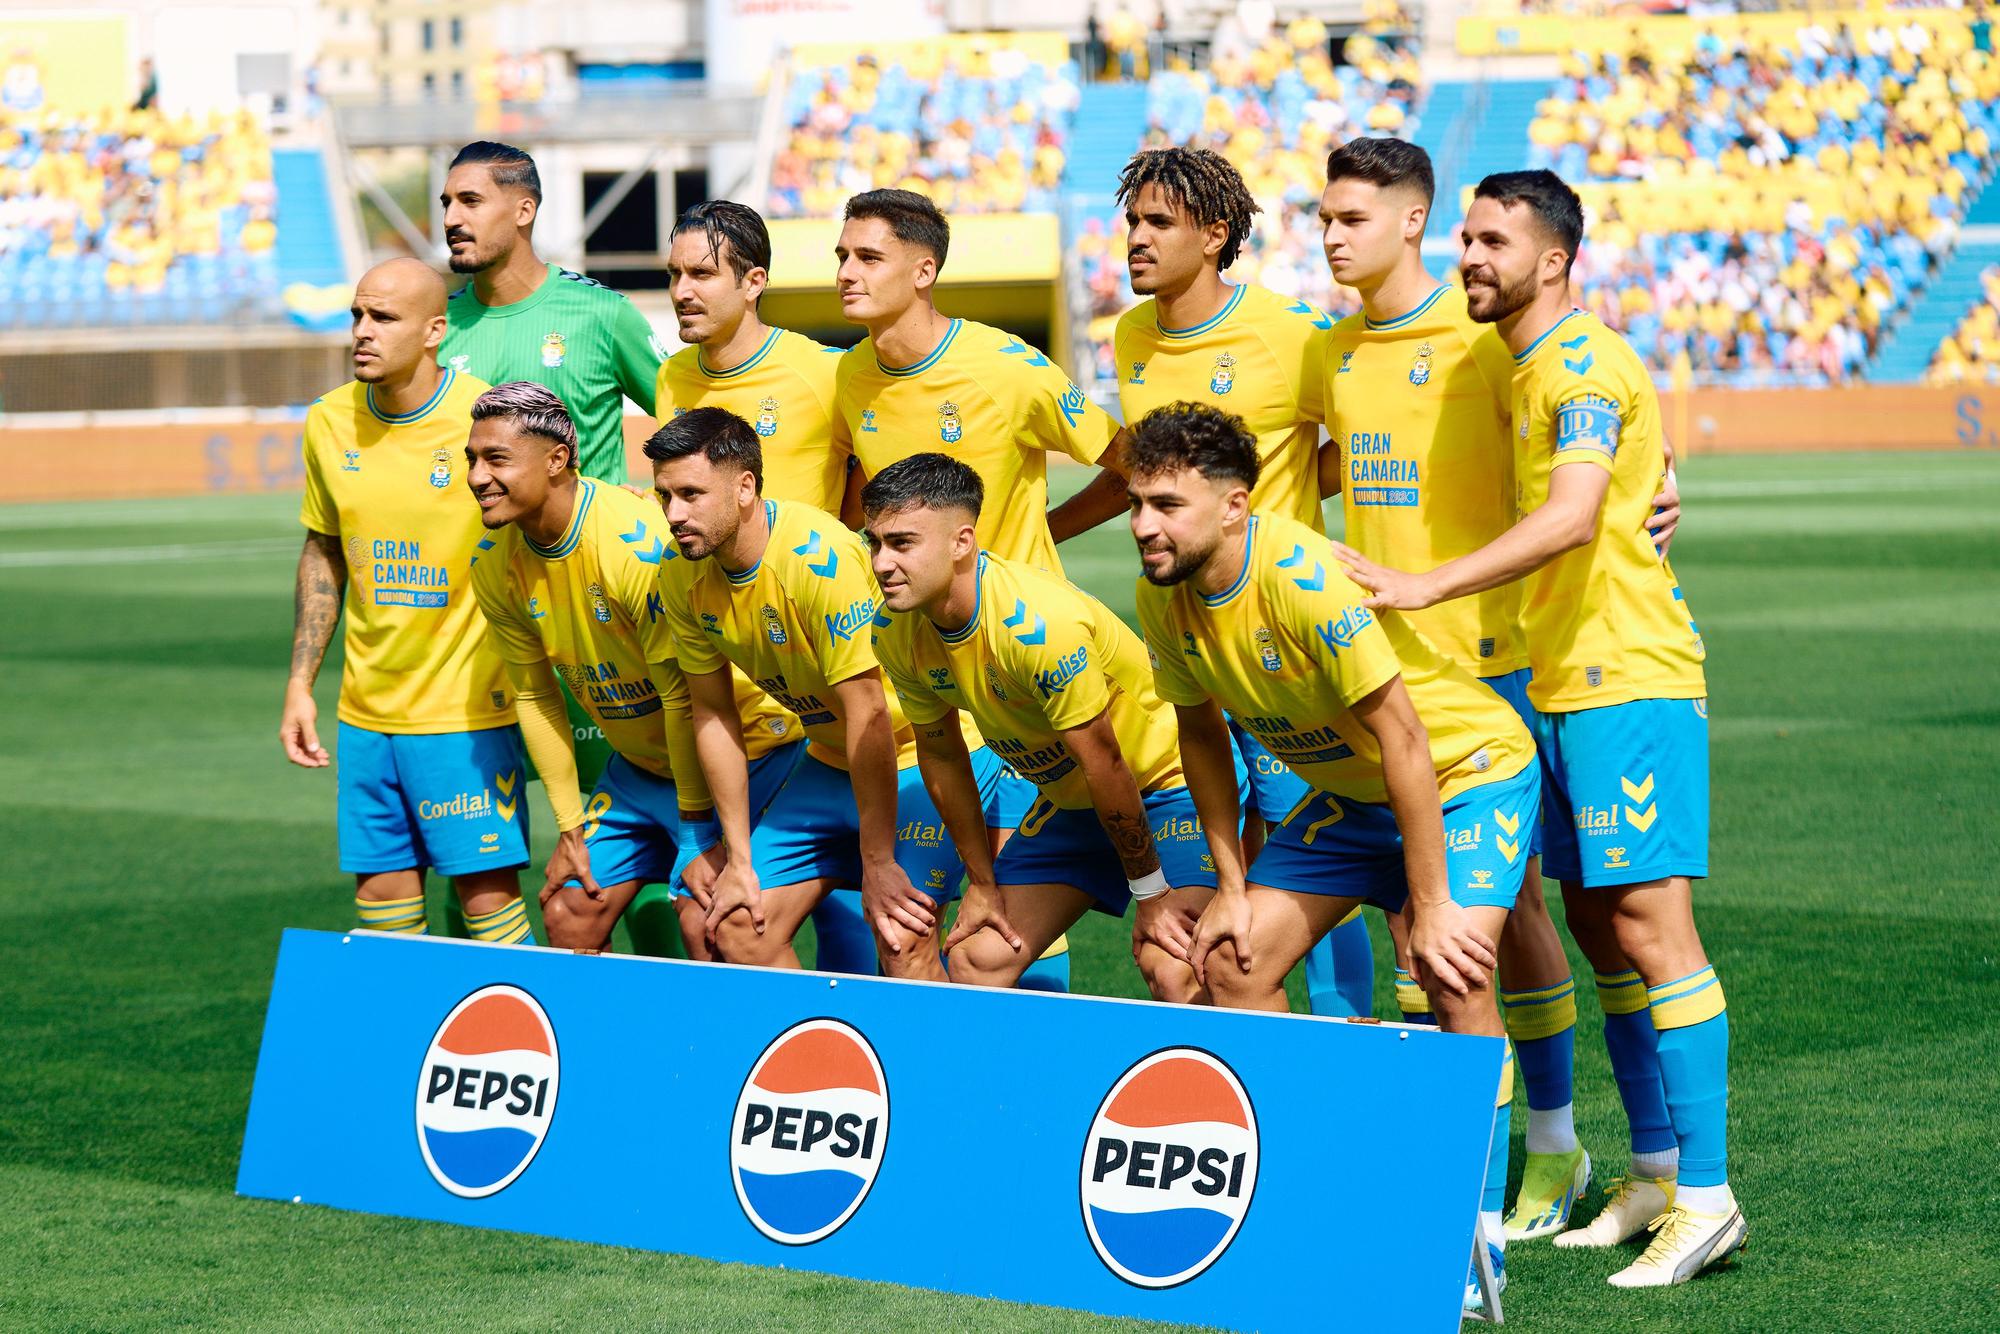 Players of UD Las Palmas during the Spanish league, La Liga EA Sports, football match played between UD Las Palmas and Athletic Club at Estadio Gran Canaria on March 10, 2024, in Las Palmas de Gran Canaria, Spain. AFP7 10/03/2024 ONLY FOR USE IN SPAIN / Gabriel Jimenez / AFP7 / Europa Press;2024;SOCCER;Sport;ZSOCCER;ZSPORT;UD Las Palmas v Athletic Club - La Liga EA Sports;